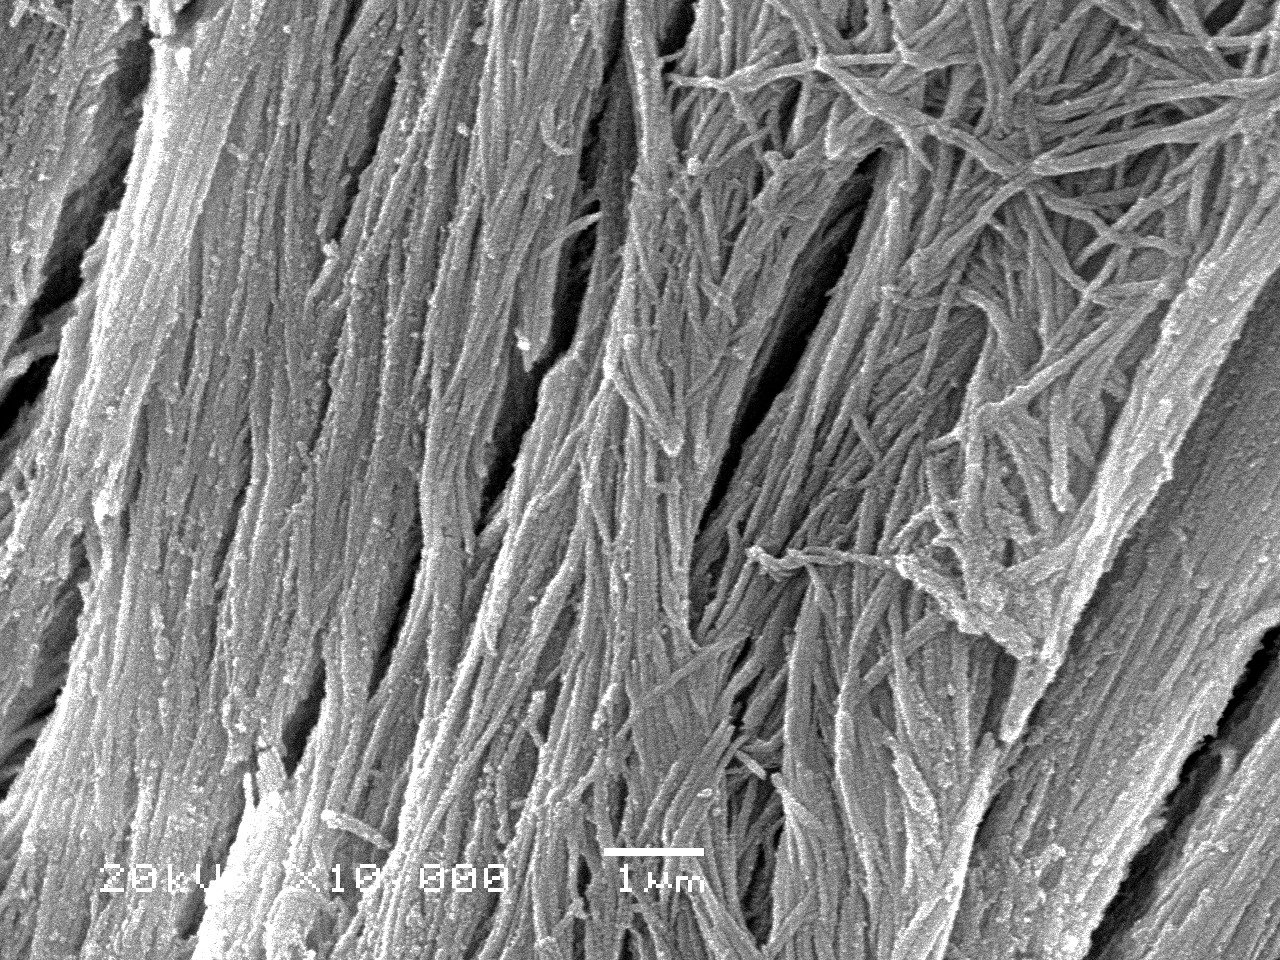 10000 magnification of mineralized collagen fibers in bone